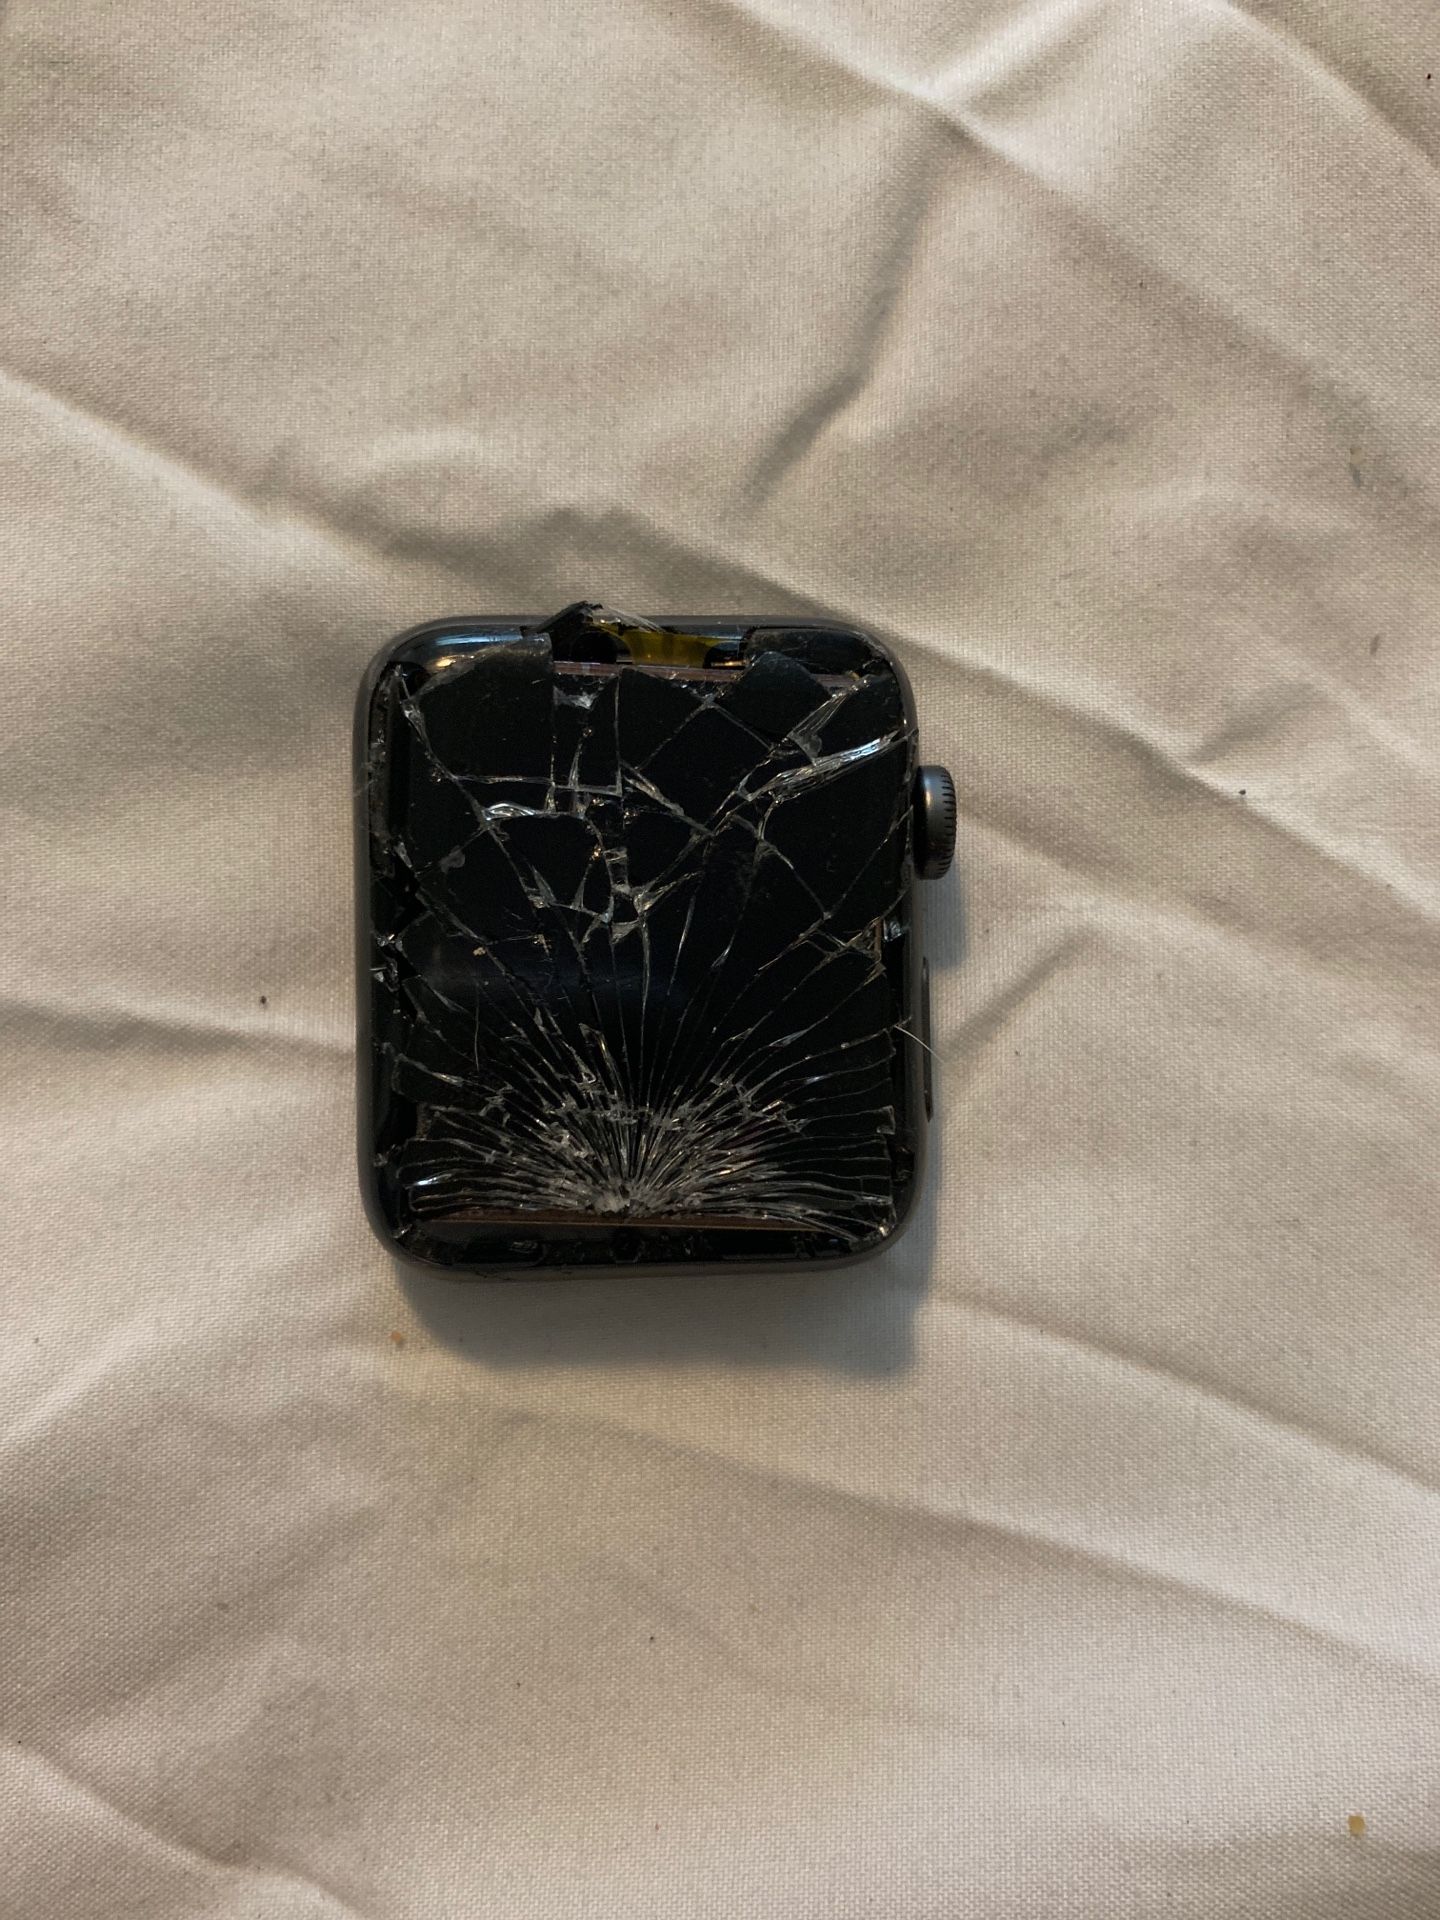 Nike Apple Watch Series 2 for parts